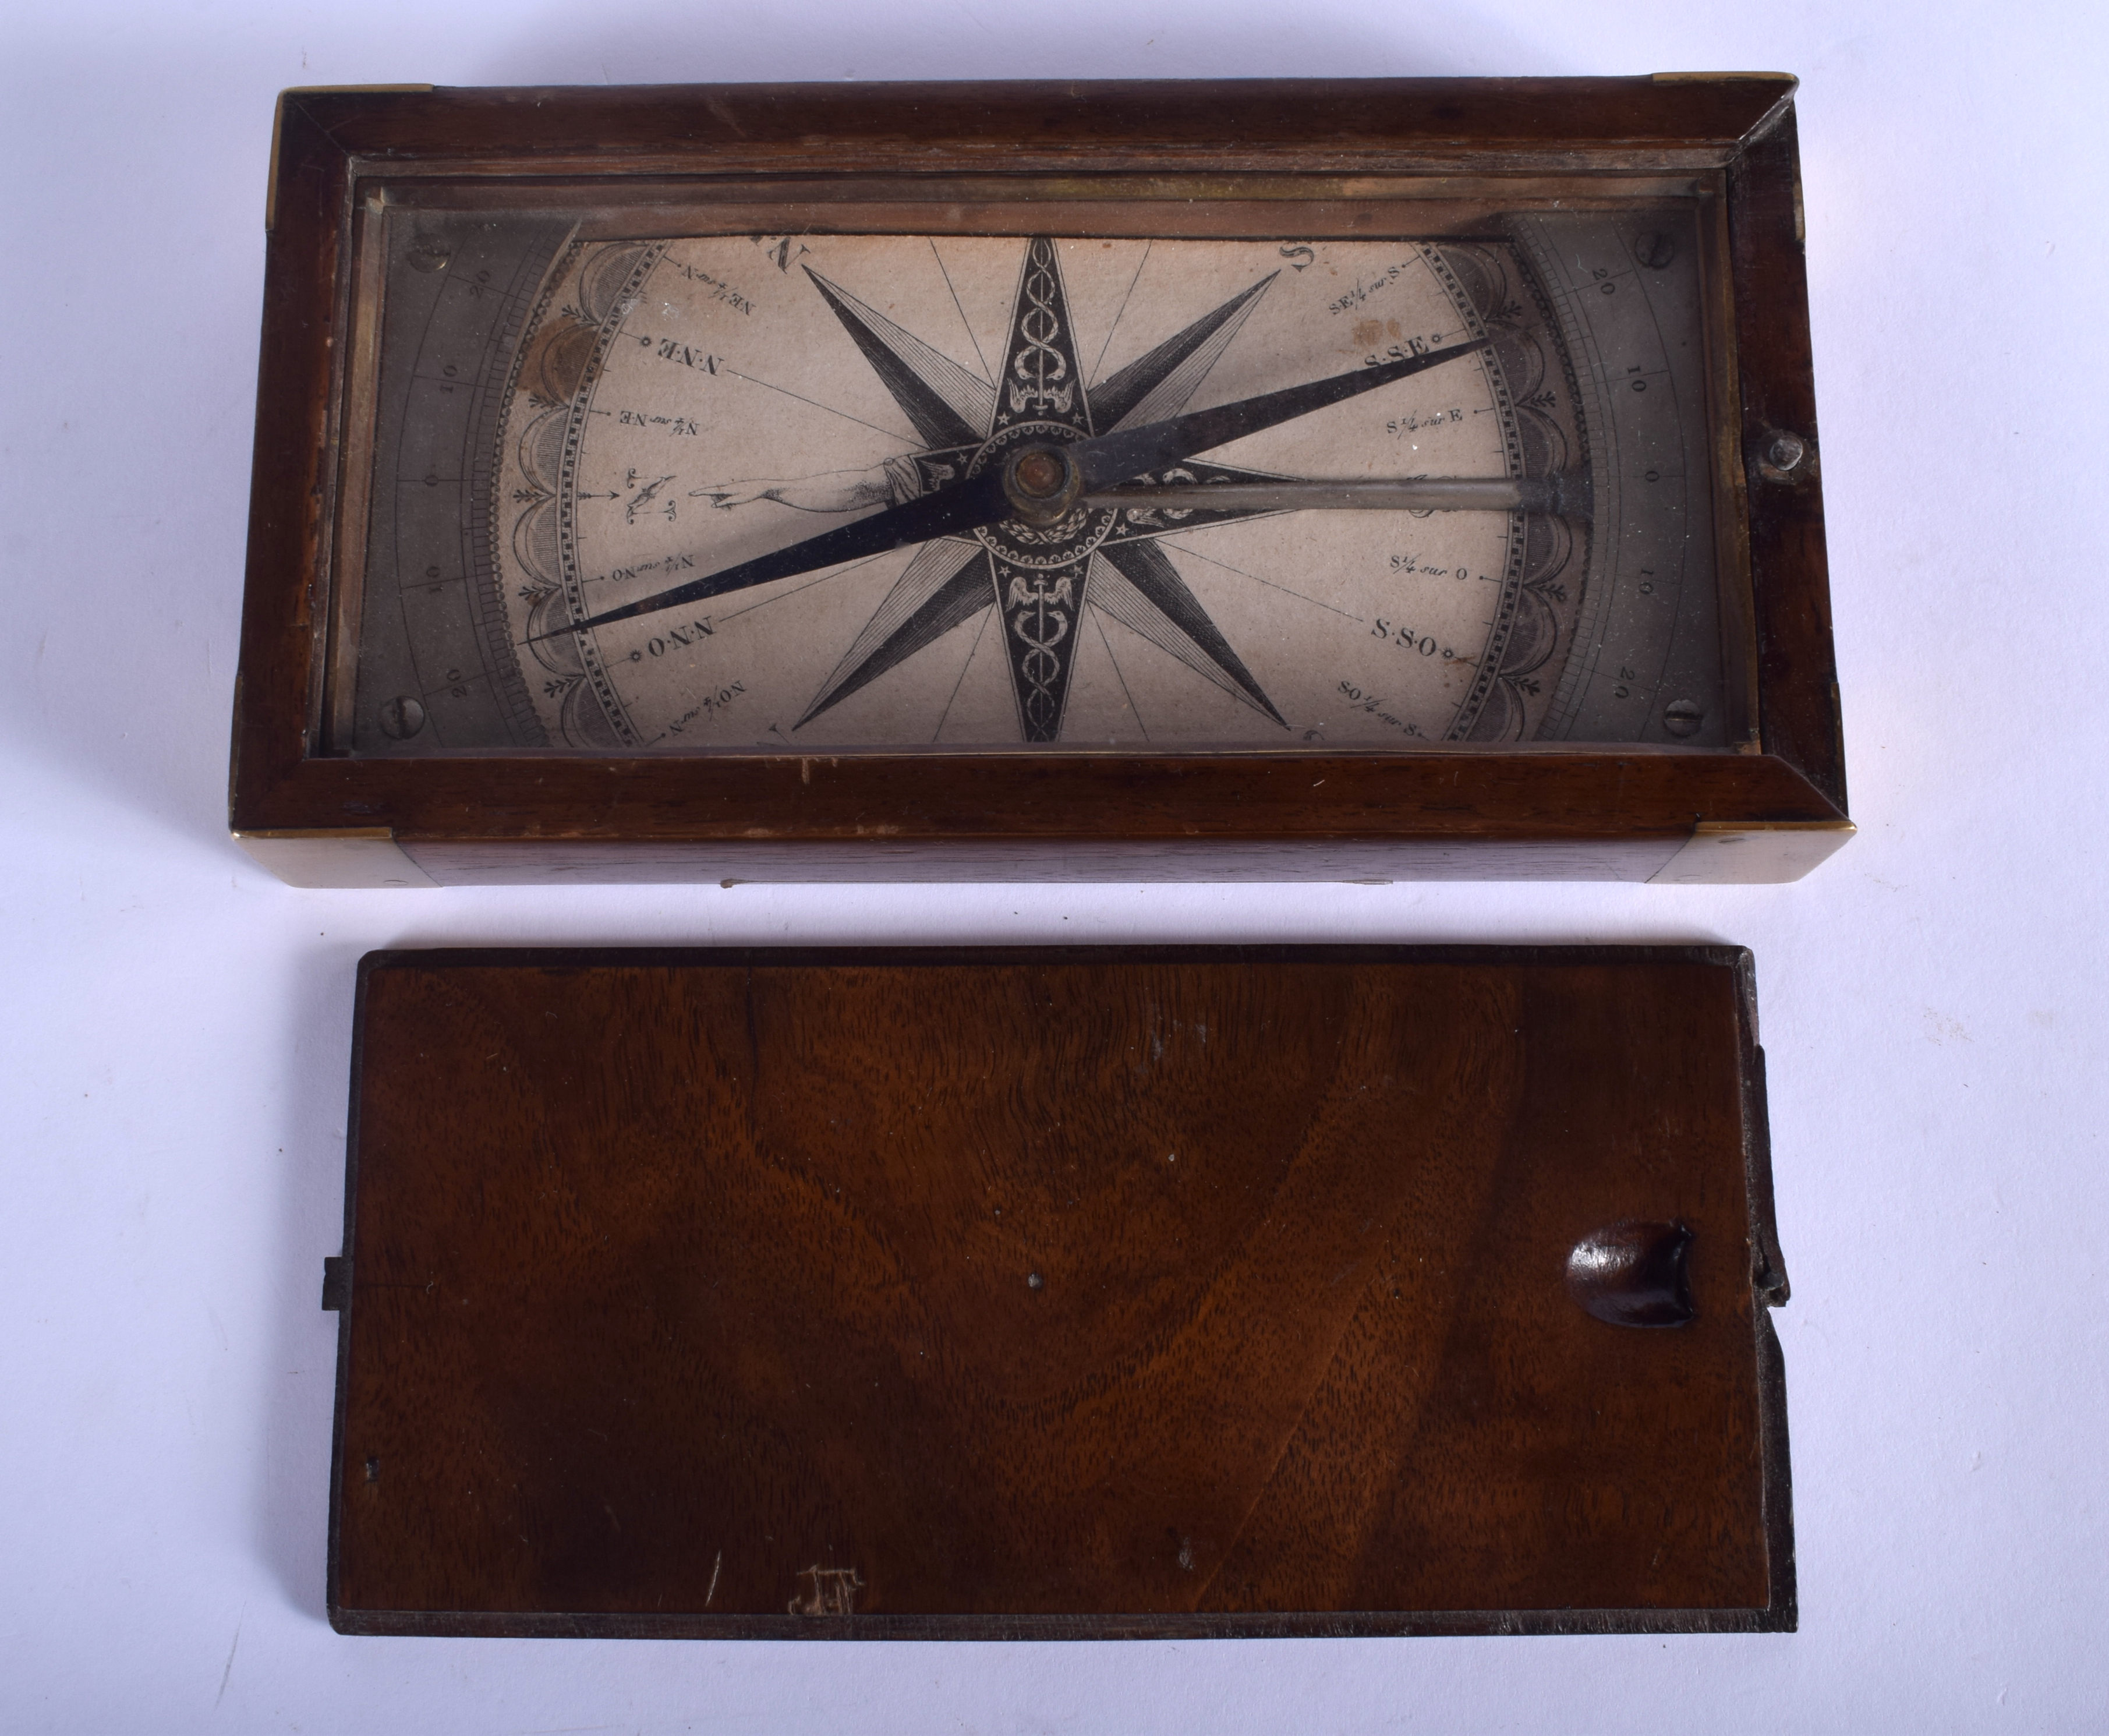 A VERY UNUSUAL 18TH CENTURY CONTINENTAL CASED TREEN SUNDIAL COMPASS with silvered mounts. 16 cm x 10